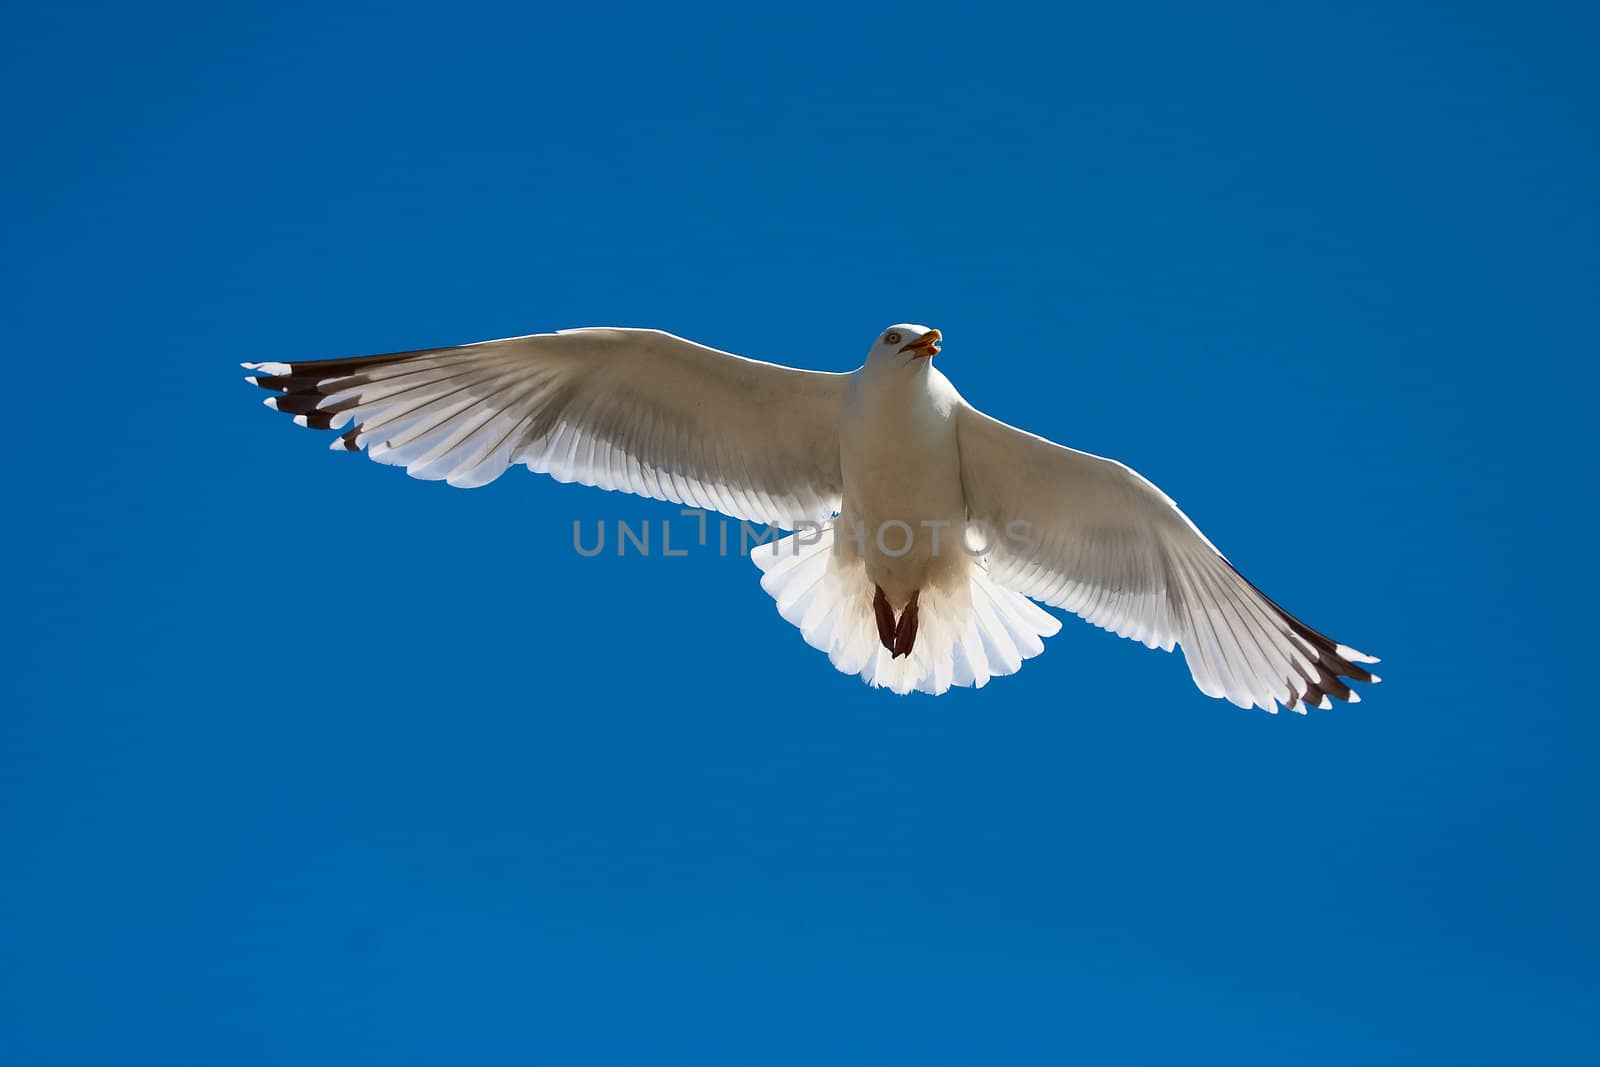 Seagull by CaptureLight